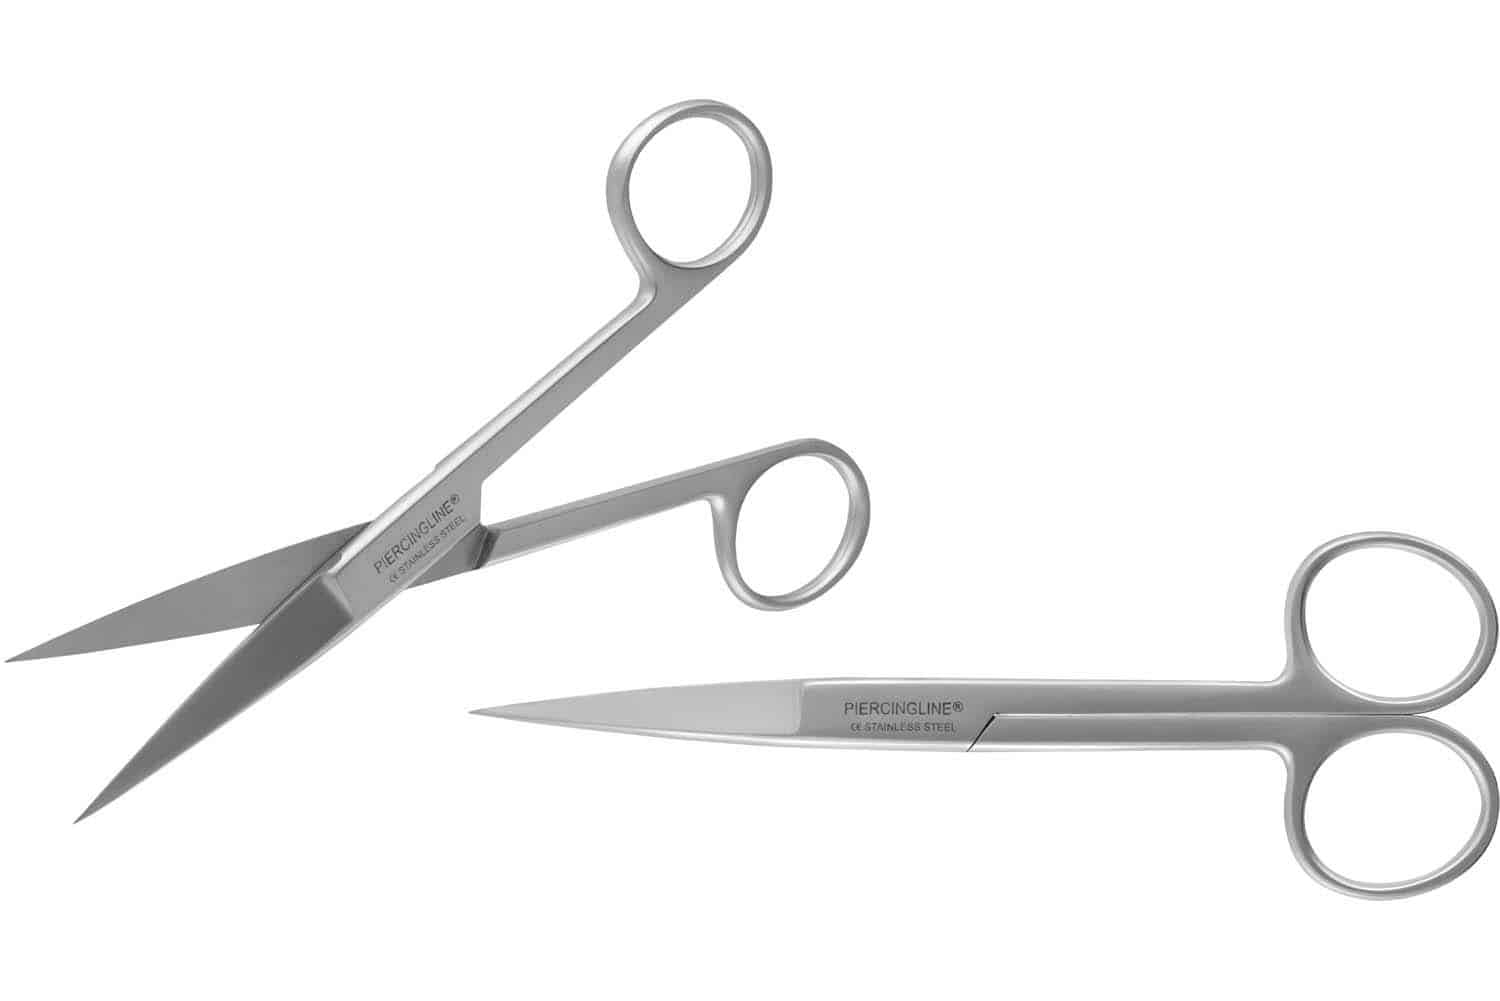 Stainless steel scissors with two pointed sides